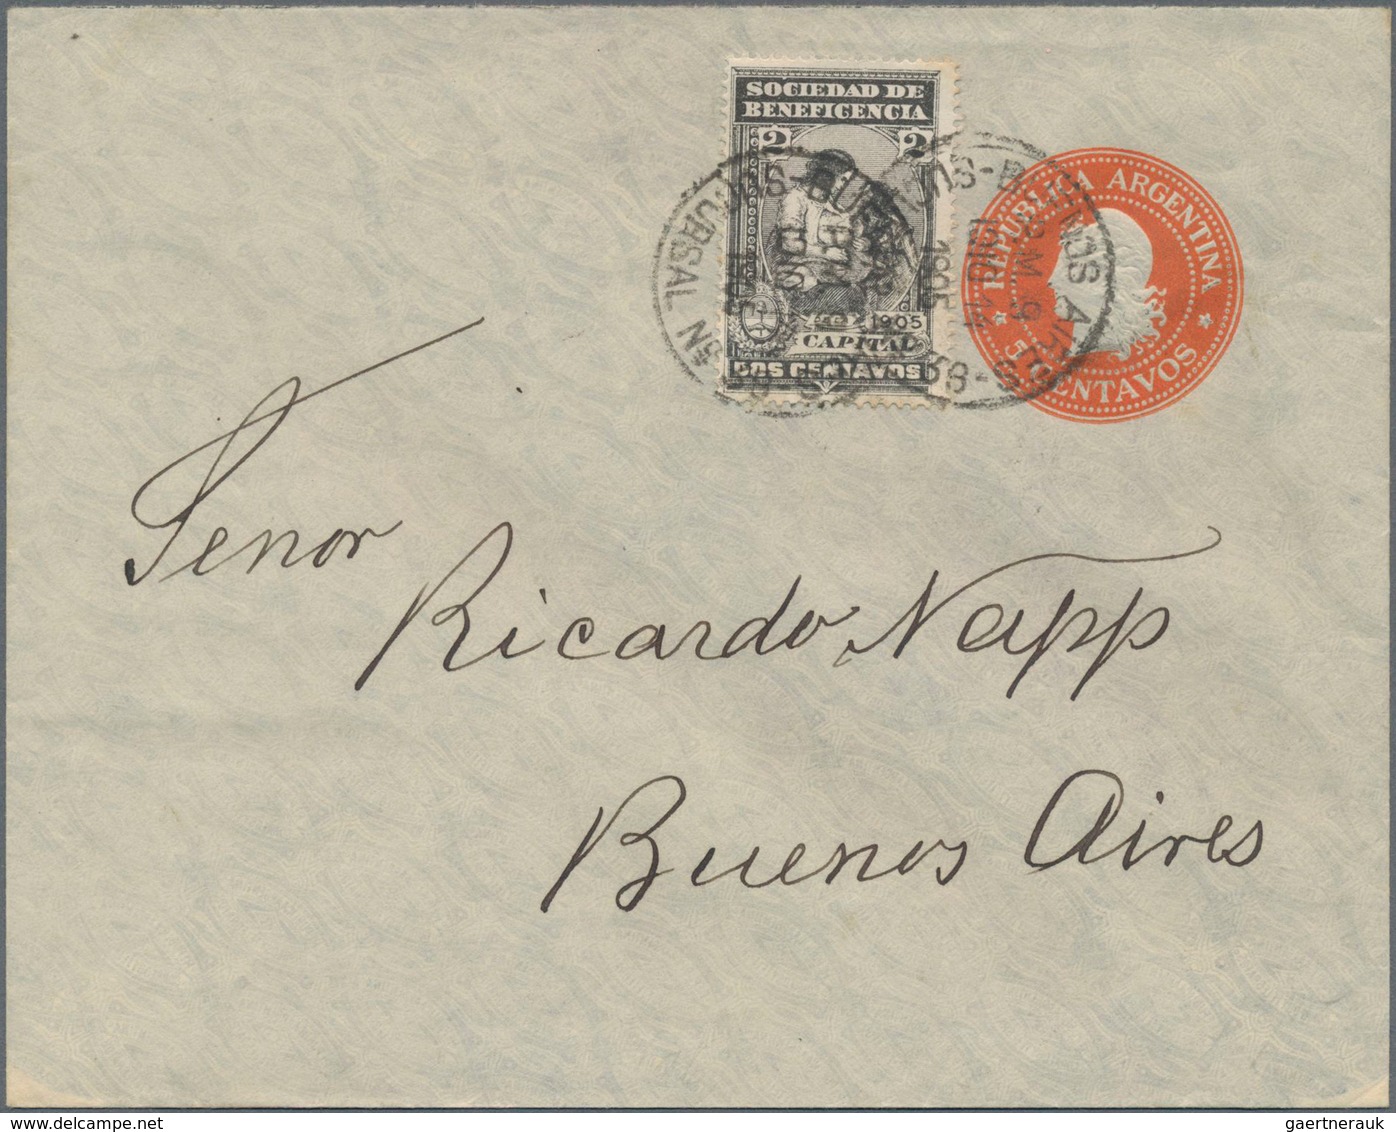 Argentinien - Ganzsachen: 1905 Commercially Local Used And Nice Uprated Postal Stationery Envelope 5 - Ganzsachen